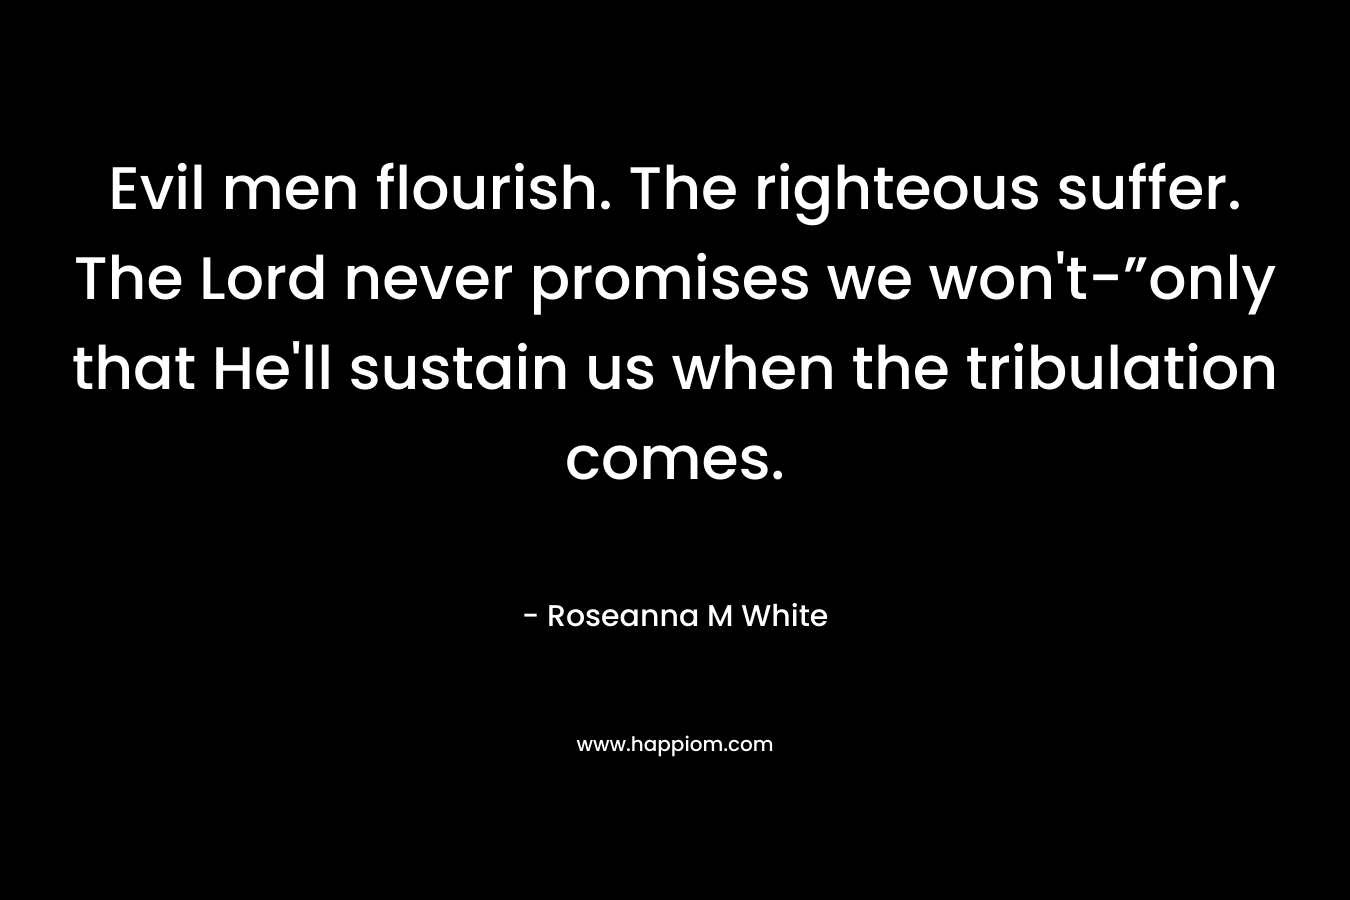 Evil men flourish. The righteous suffer. The Lord never promises we won’t-”only that He’ll sustain us when the tribulation comes. – Roseanna M White